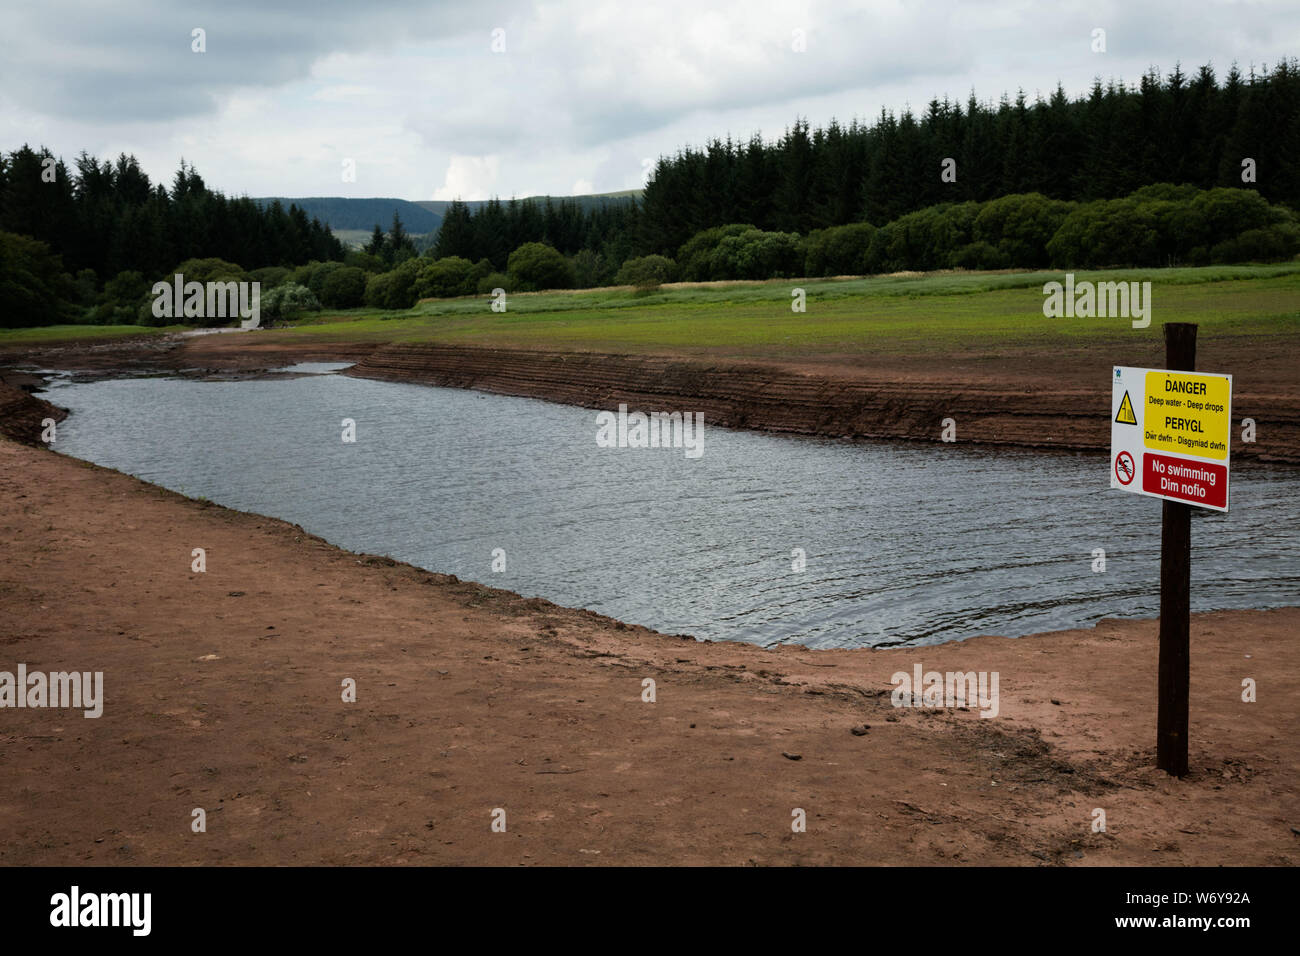 Llwyn On Reservoir, Merthyr Tydfil, South Wales, UK.  3 August 2019.  UK weather: With the continued heatwave over recent weeks, the reservoir has depleted and uncovered an old bridge normally underwater, Pont Yr Daf.  It was in use before the reservoir's construction.  Credit: Andrew Bartlett/Alamy Live News Stock Photo